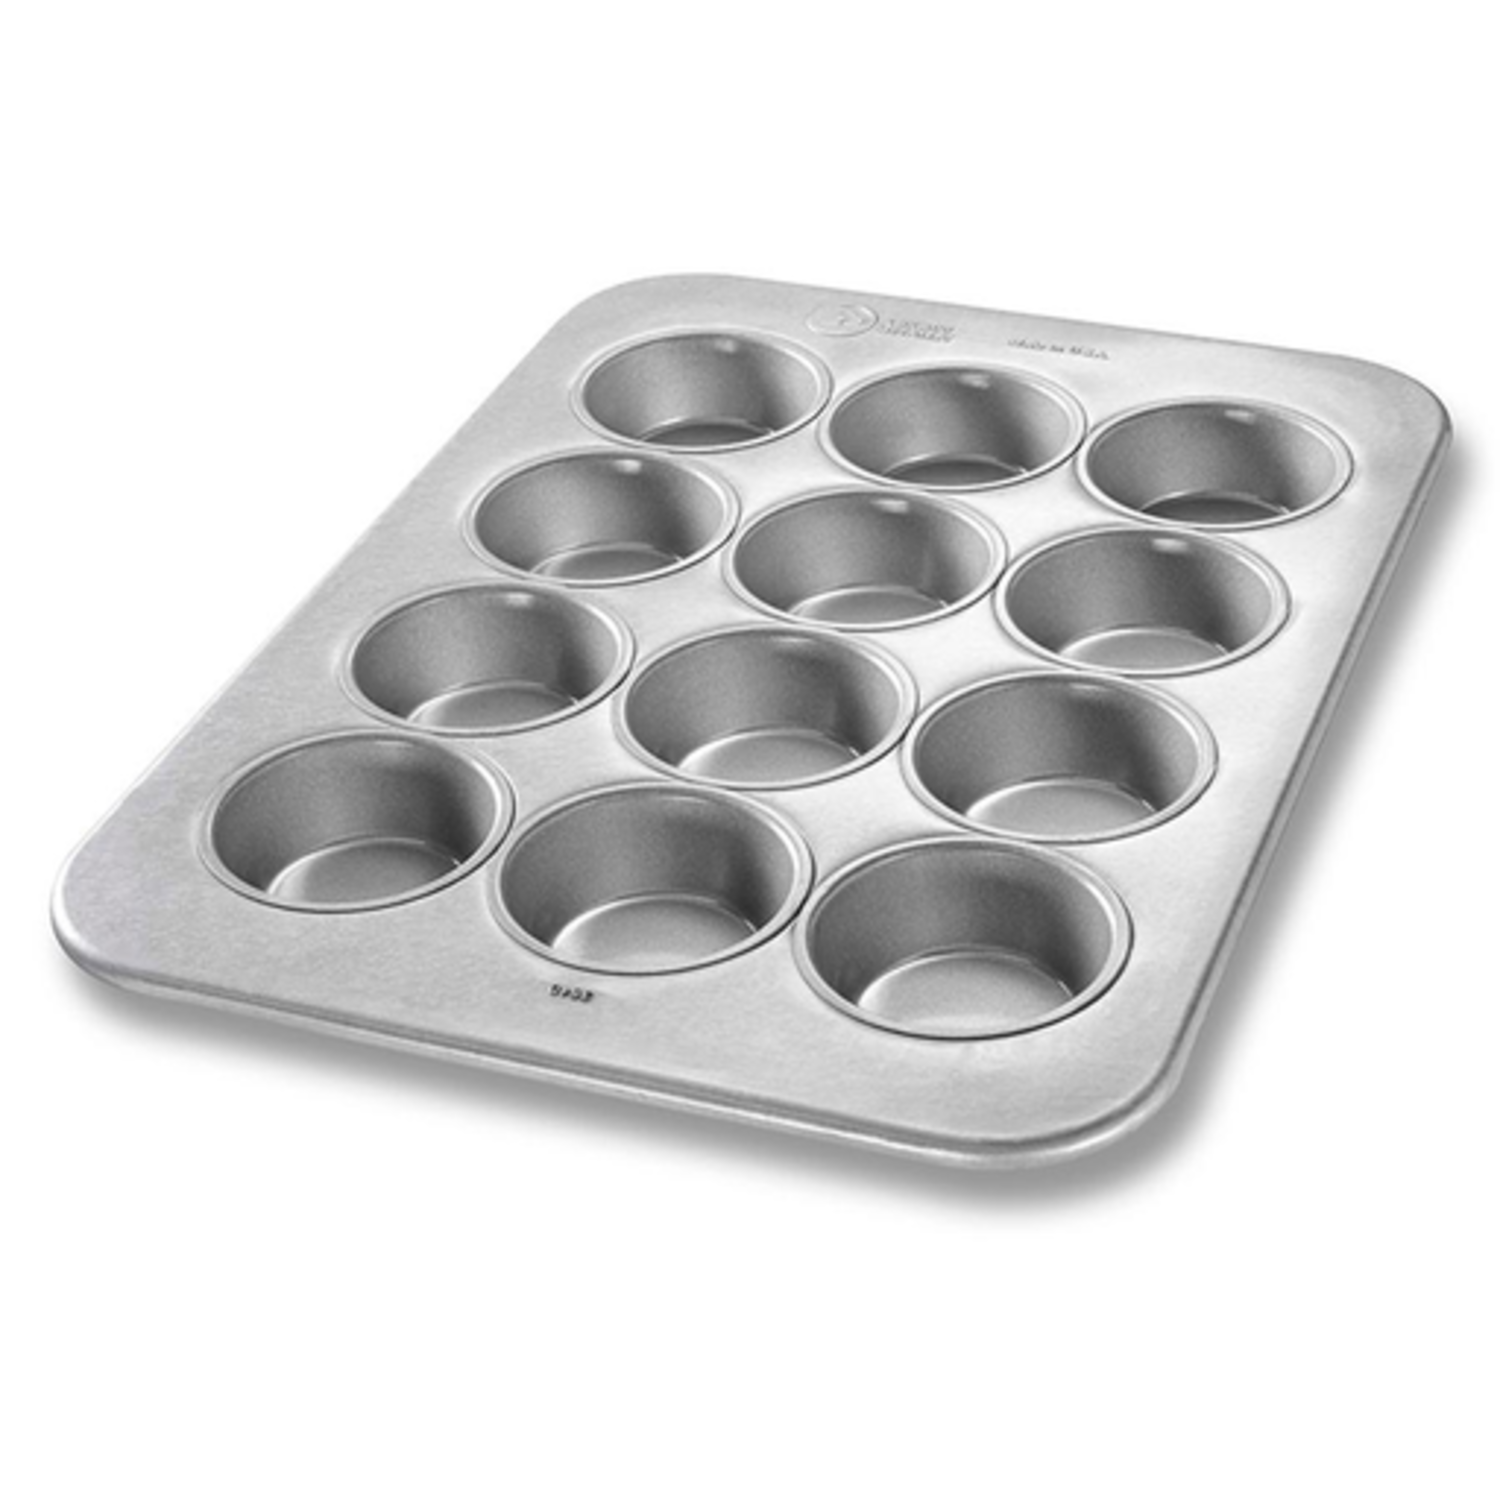 Standlee's Inc. - NEW ITEM!!! 12 Cavity Muffin Top Pan